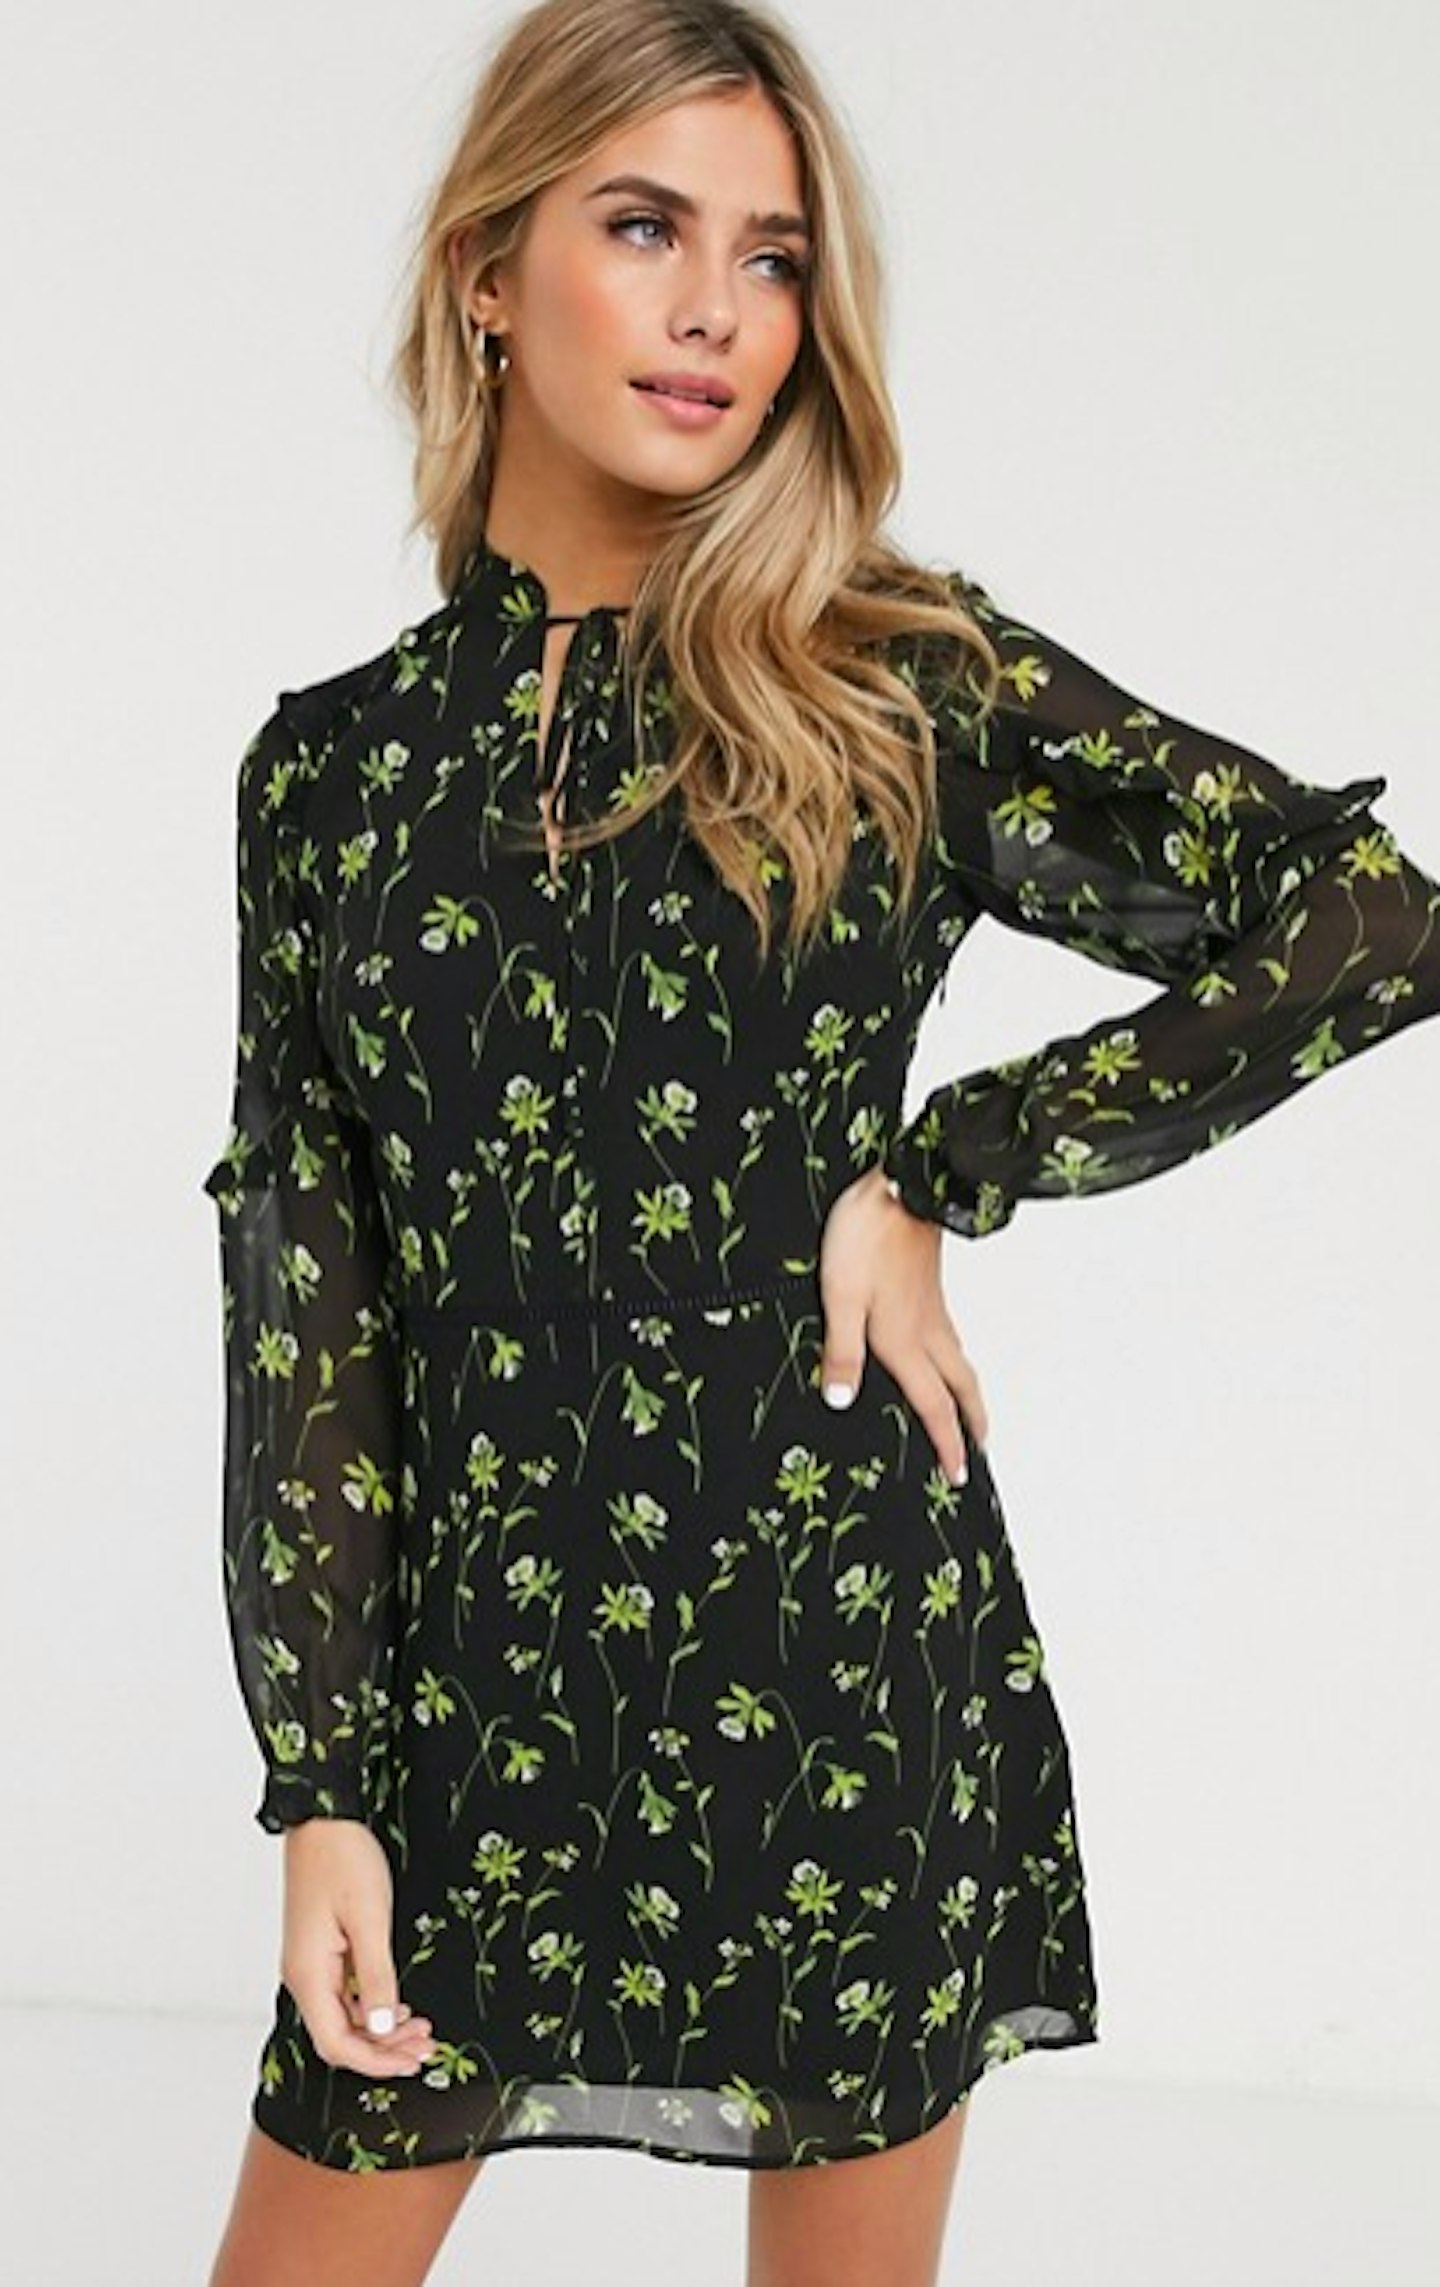 laura whitmore floral cut out chest dress